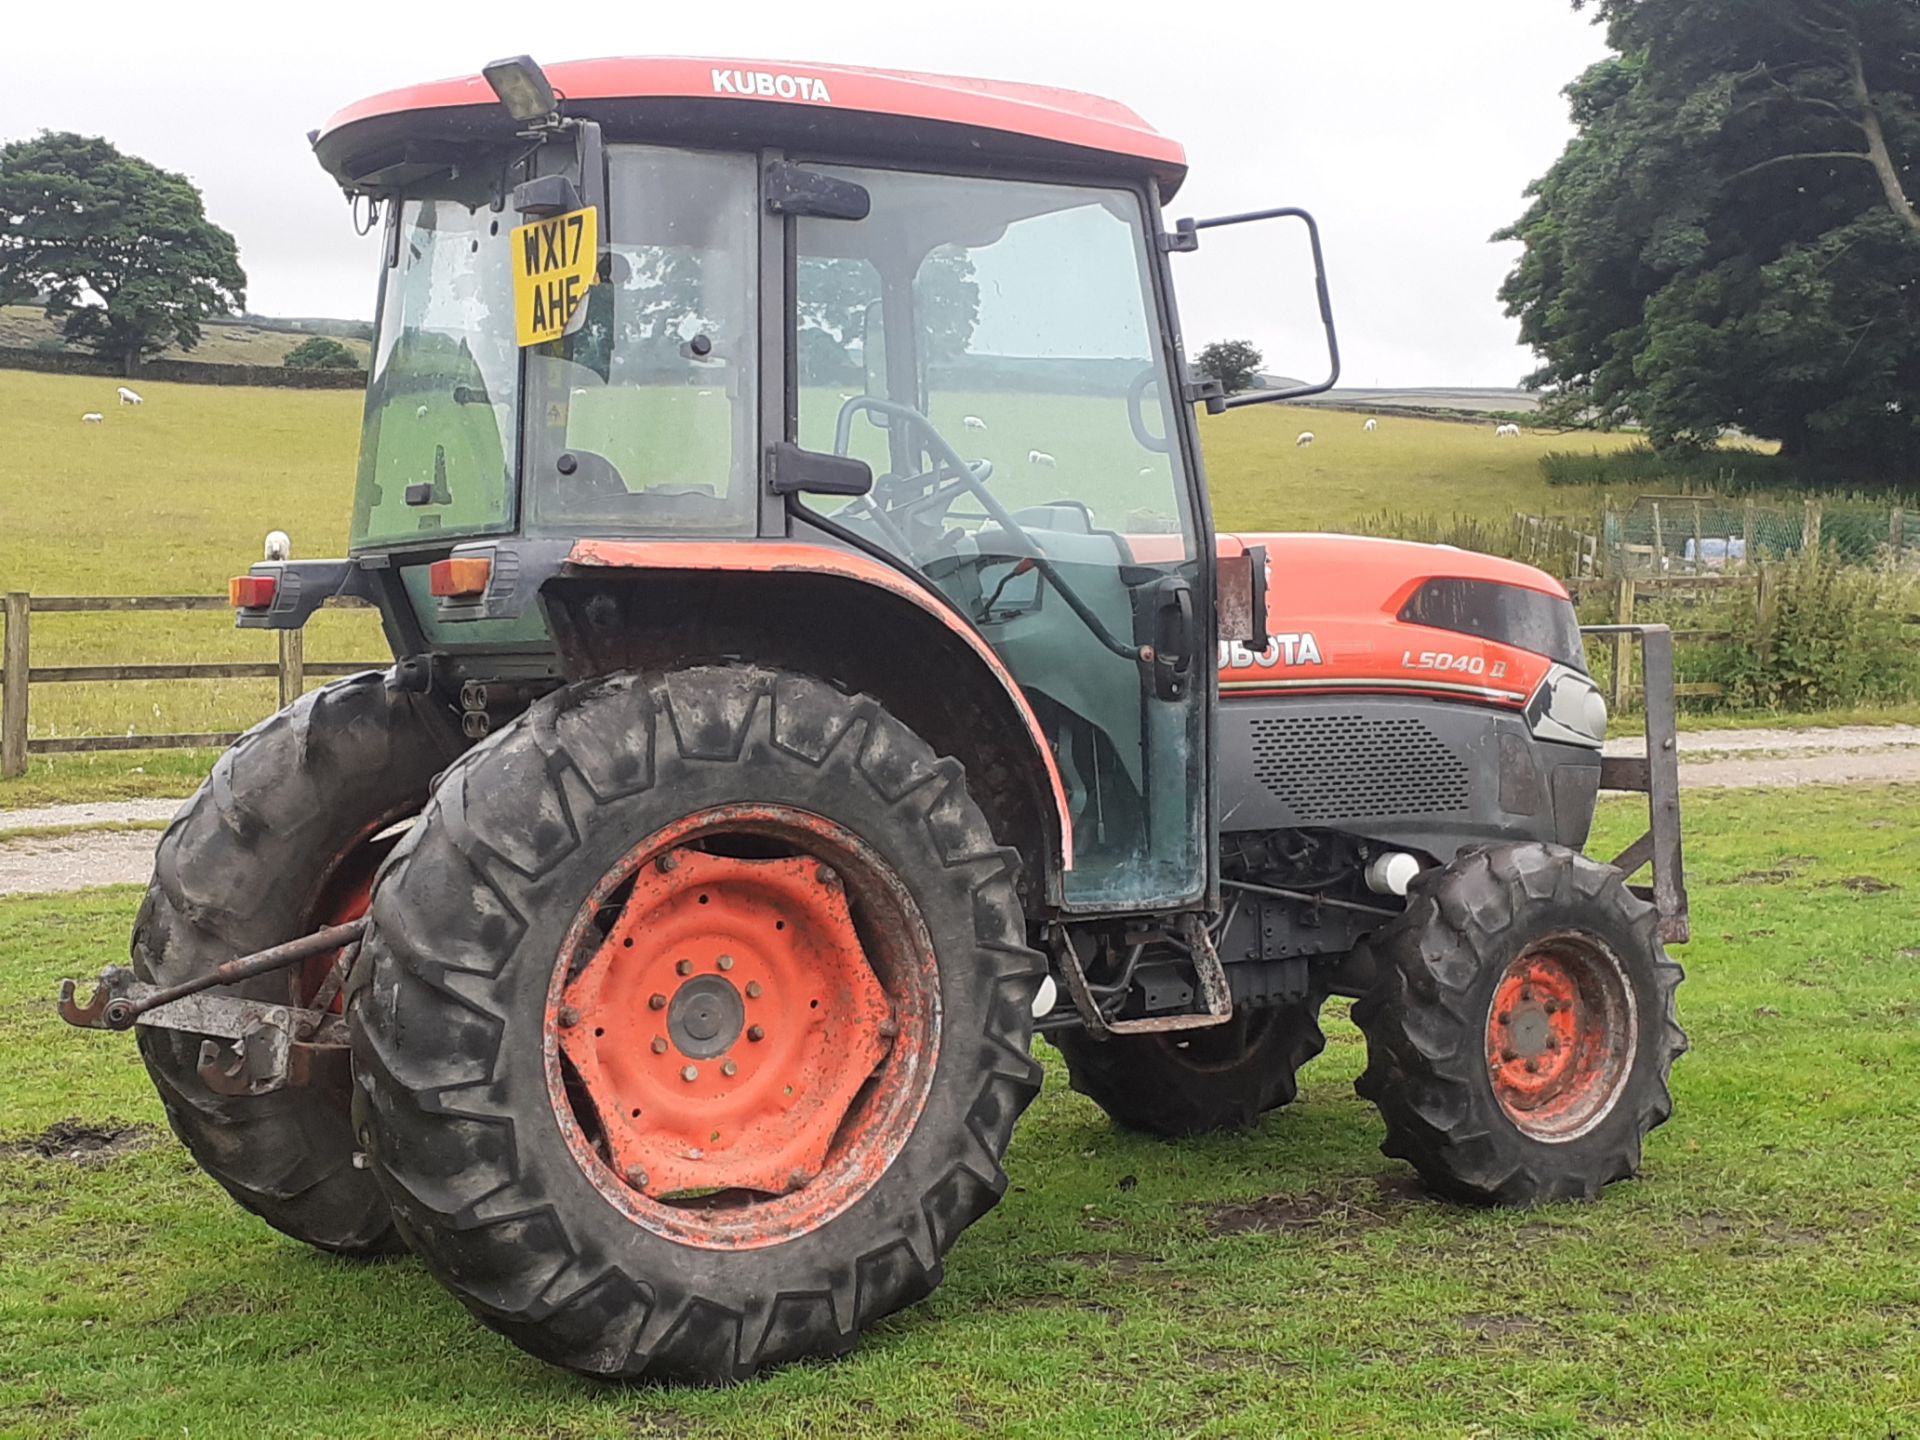 2017 KUBOTA L5040 SERIES II COMPACT TRACTOR, ROAD REGISTERED, A LOW 3490 HOURS *PLUS VAT* - Image 3 of 4